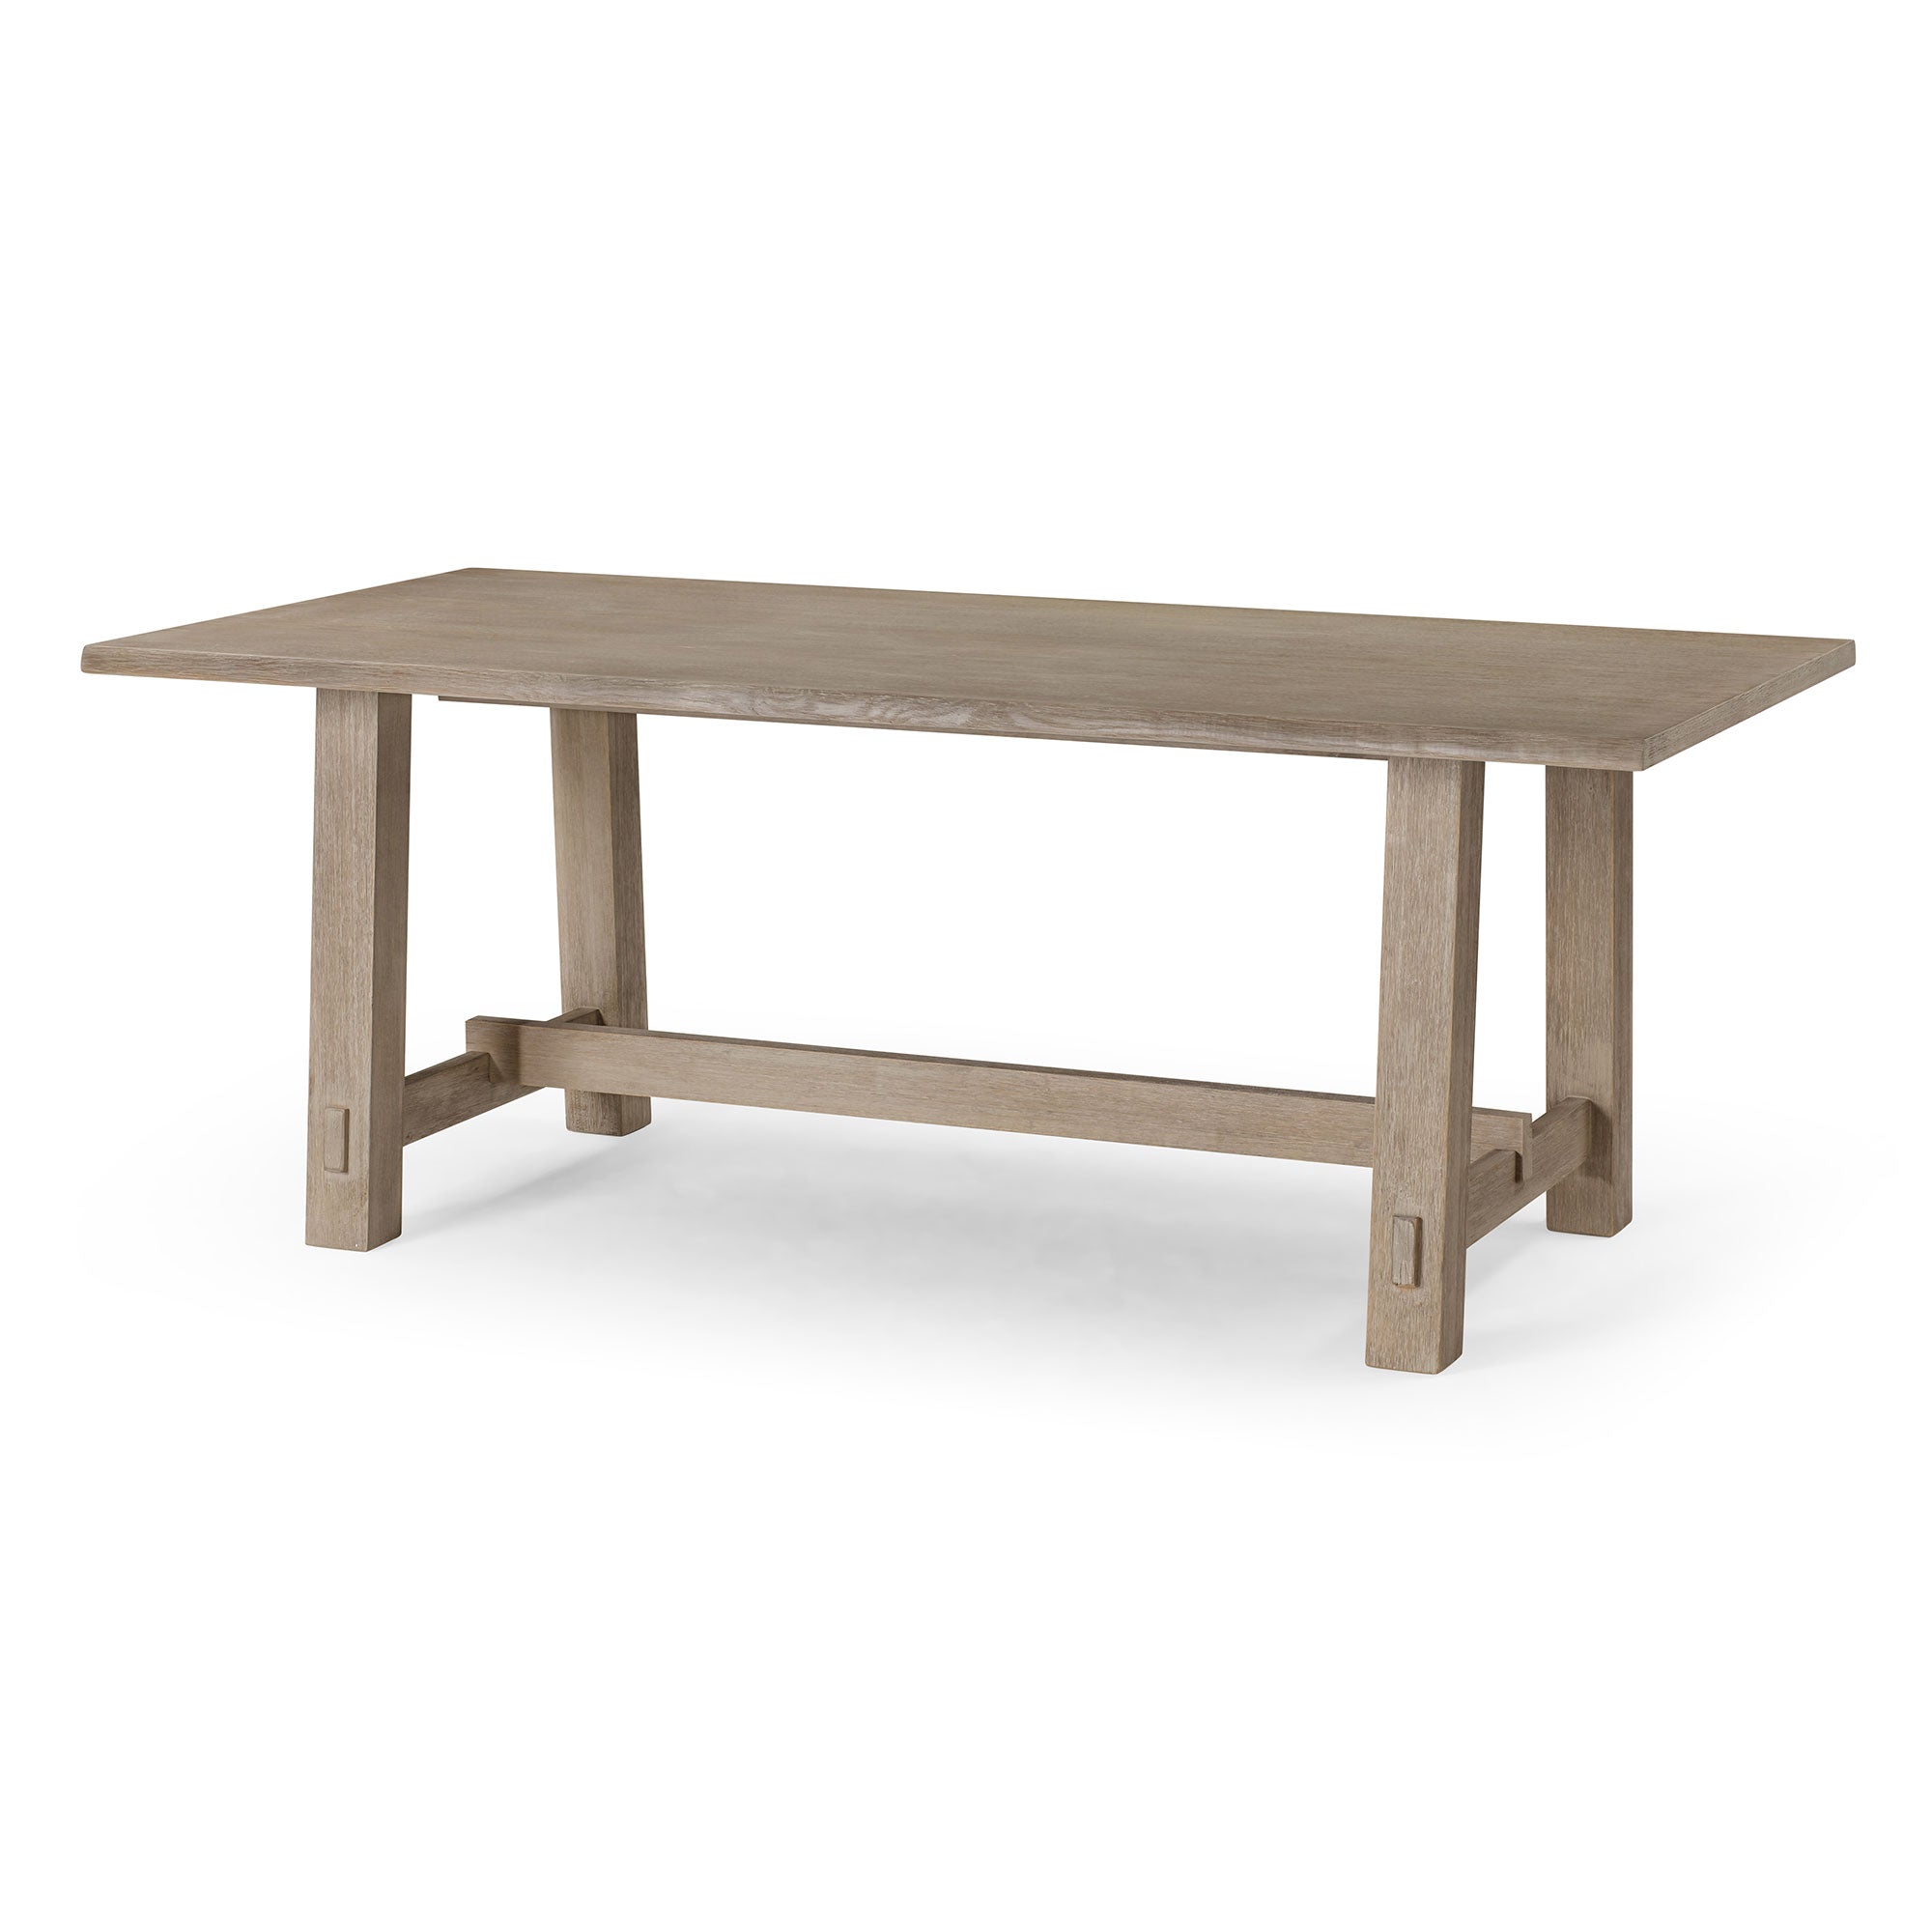 Maven-Lane-Yves-Rectangular-Wooden-Dining-Table-in-Weathered-Grey-Finish-Kitchen-&-Dining-Room-Tables